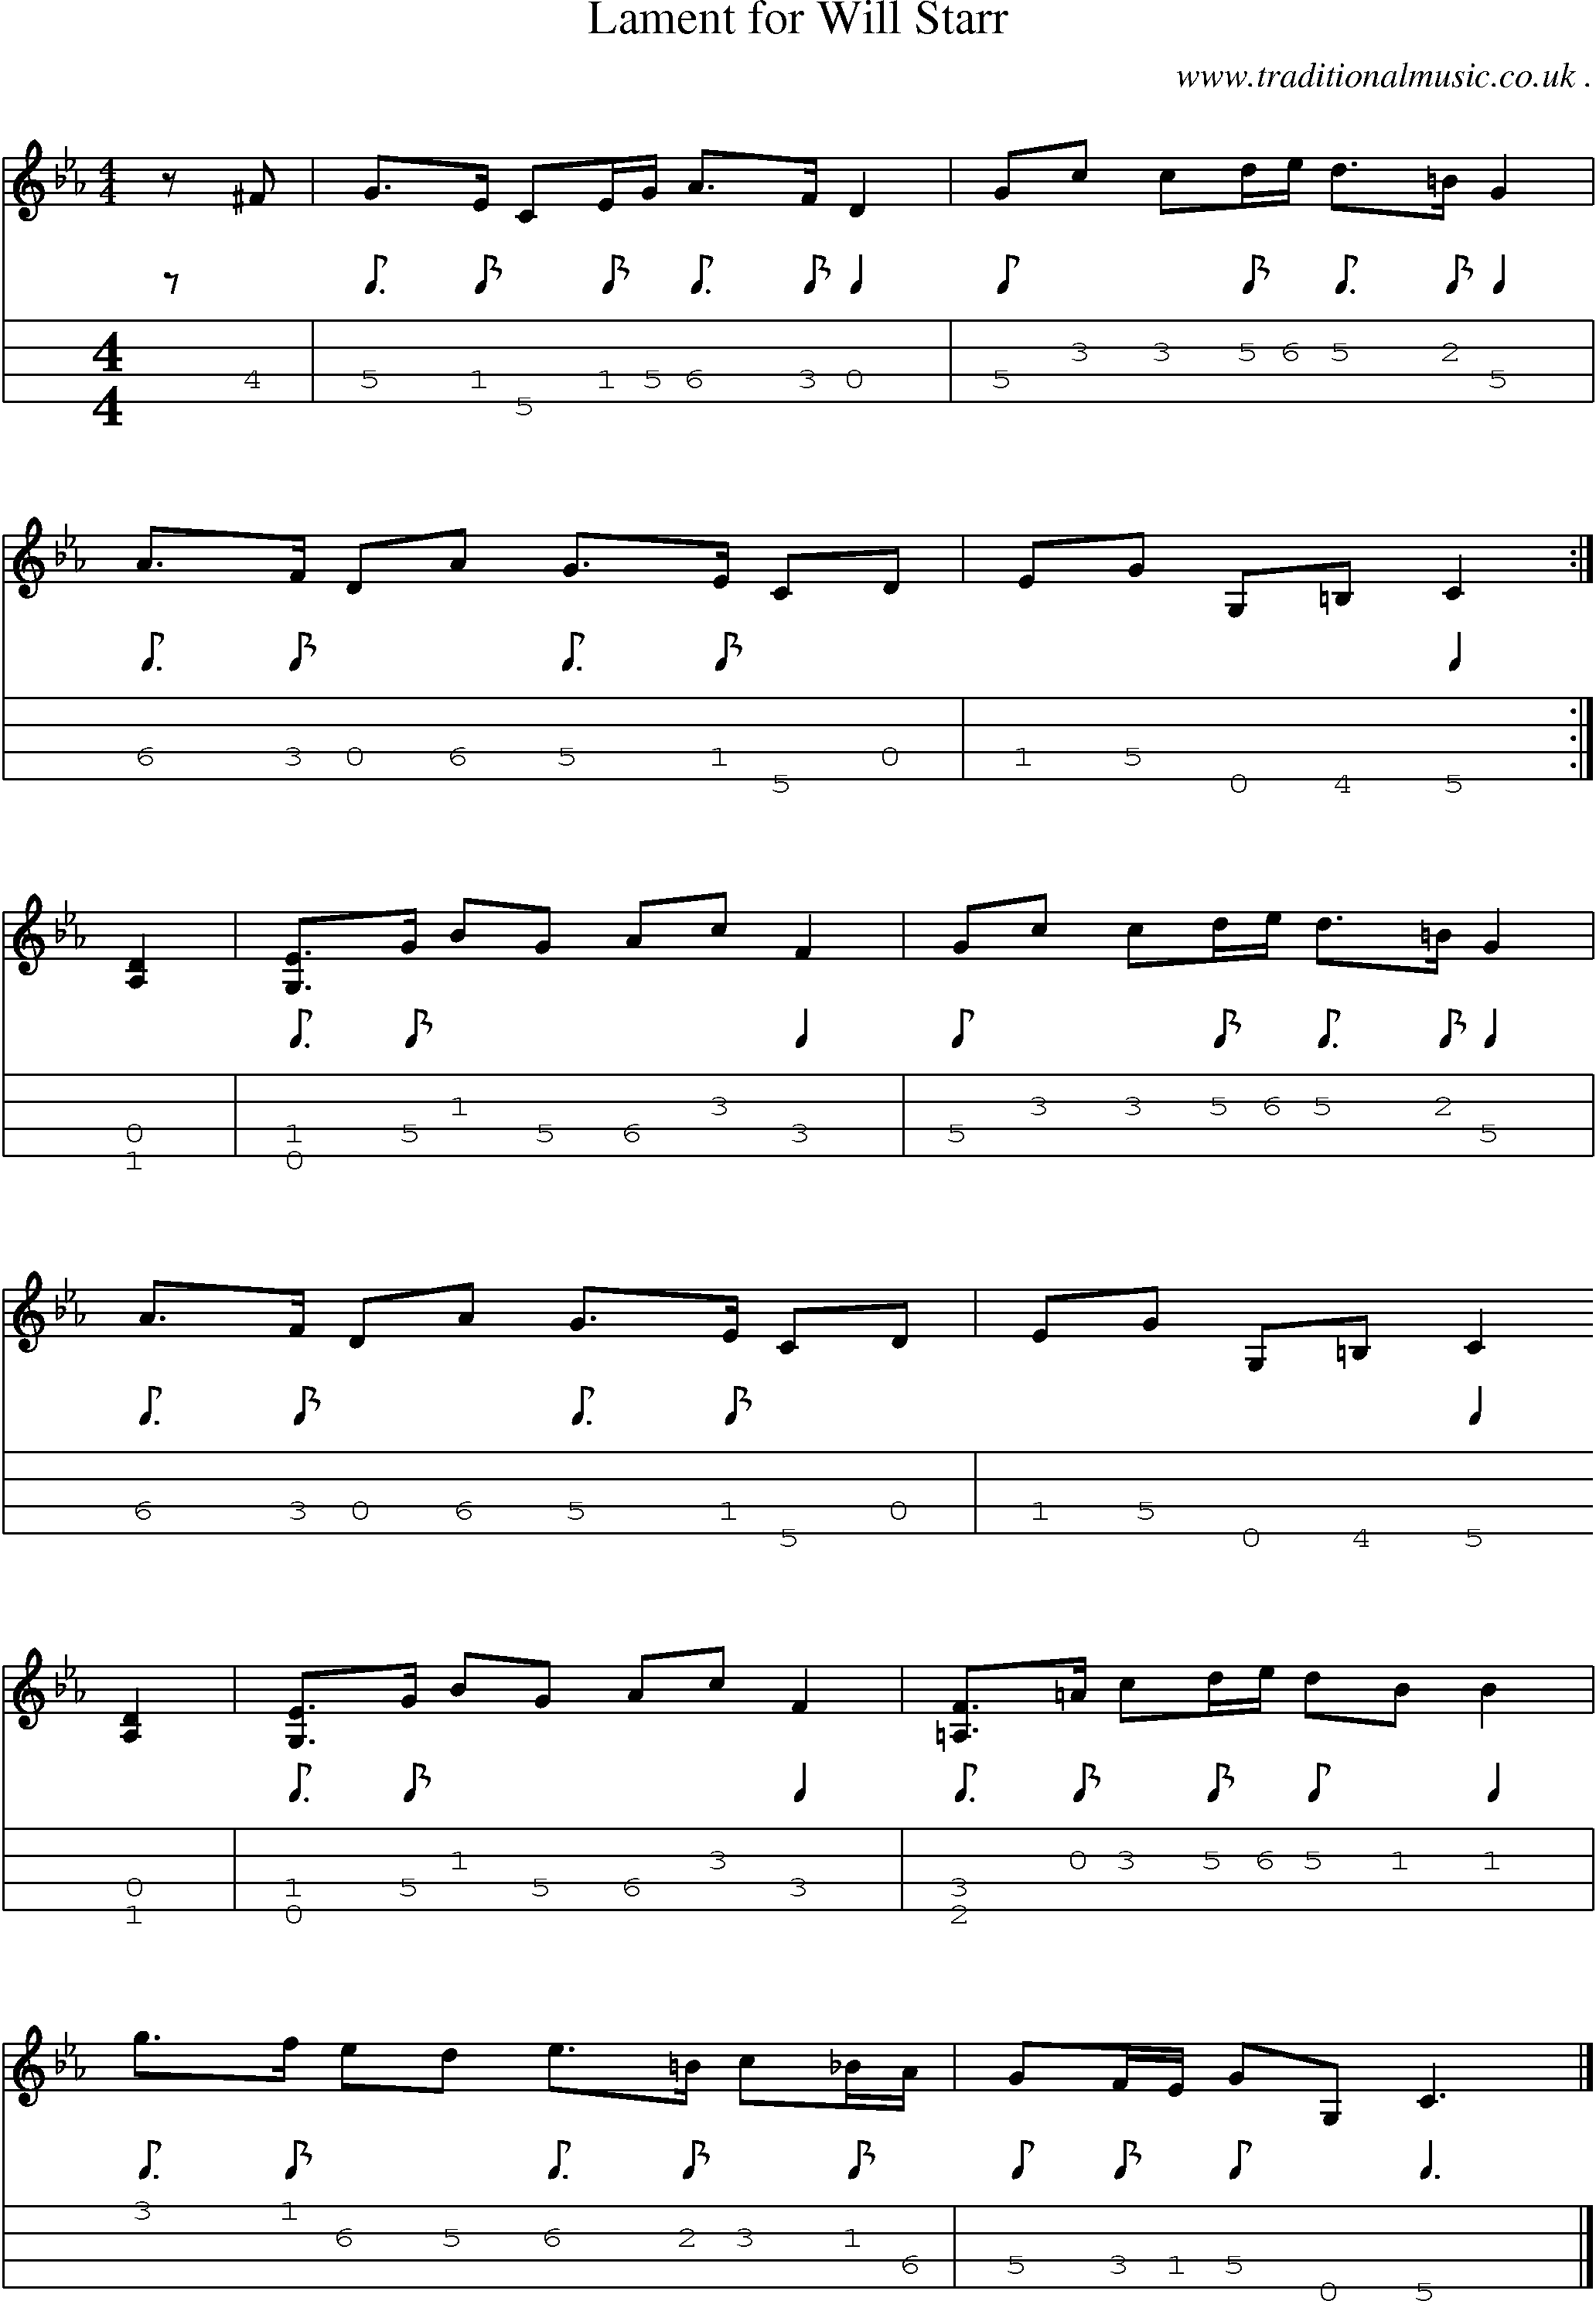 Sheet-music  score, Chords and Mandolin Tabs for Lament For Will Starr